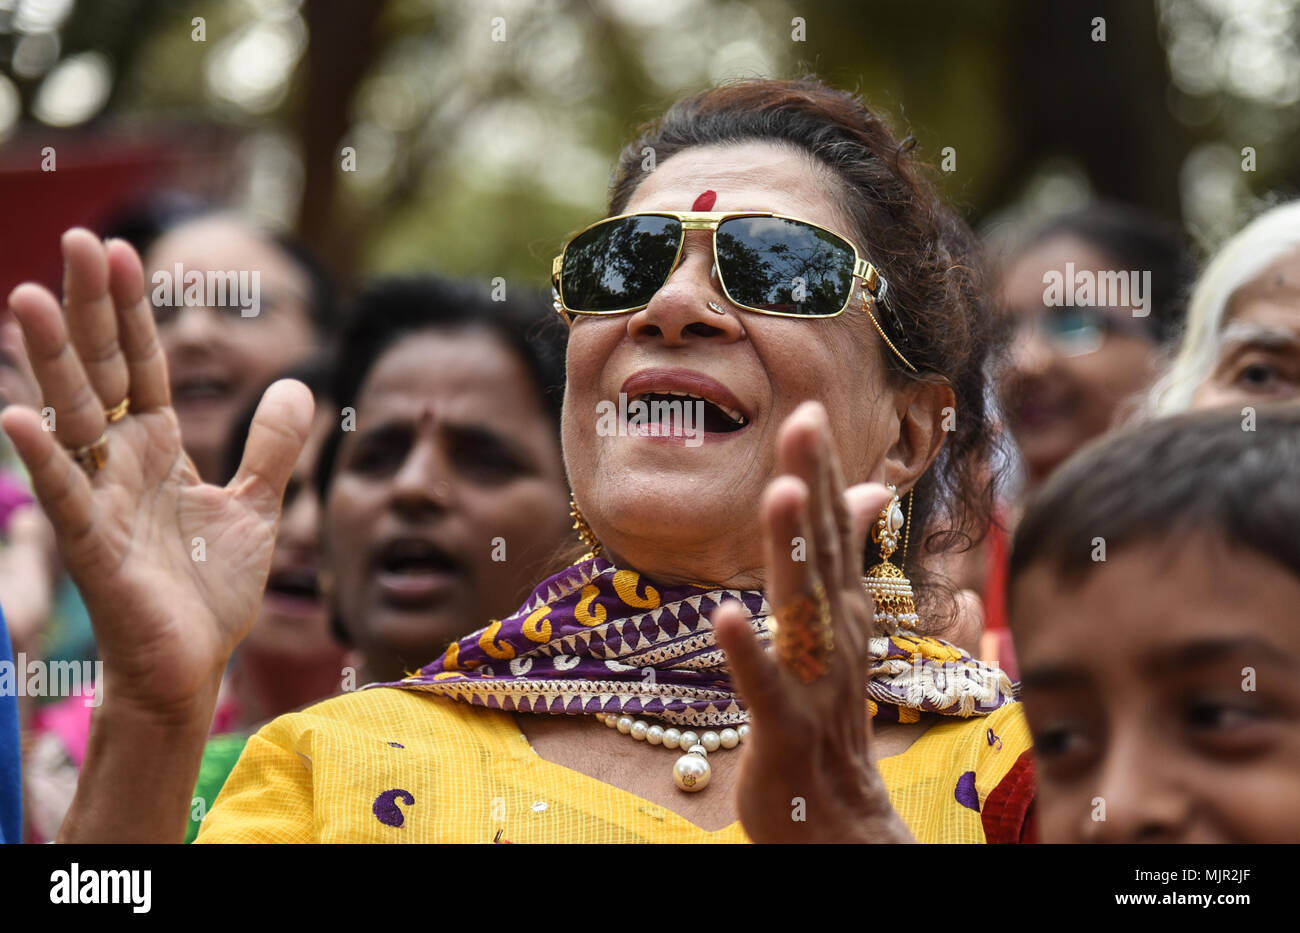 Mumbai. 6th May, 2018. A woman participates in a World Laughter Day event held in Mumbai on May 6, 2018. World Laughter Day takes place on the first Sunday of May every year. Credit: Stringer/Xinhua/Alamy Live News Stock Photo